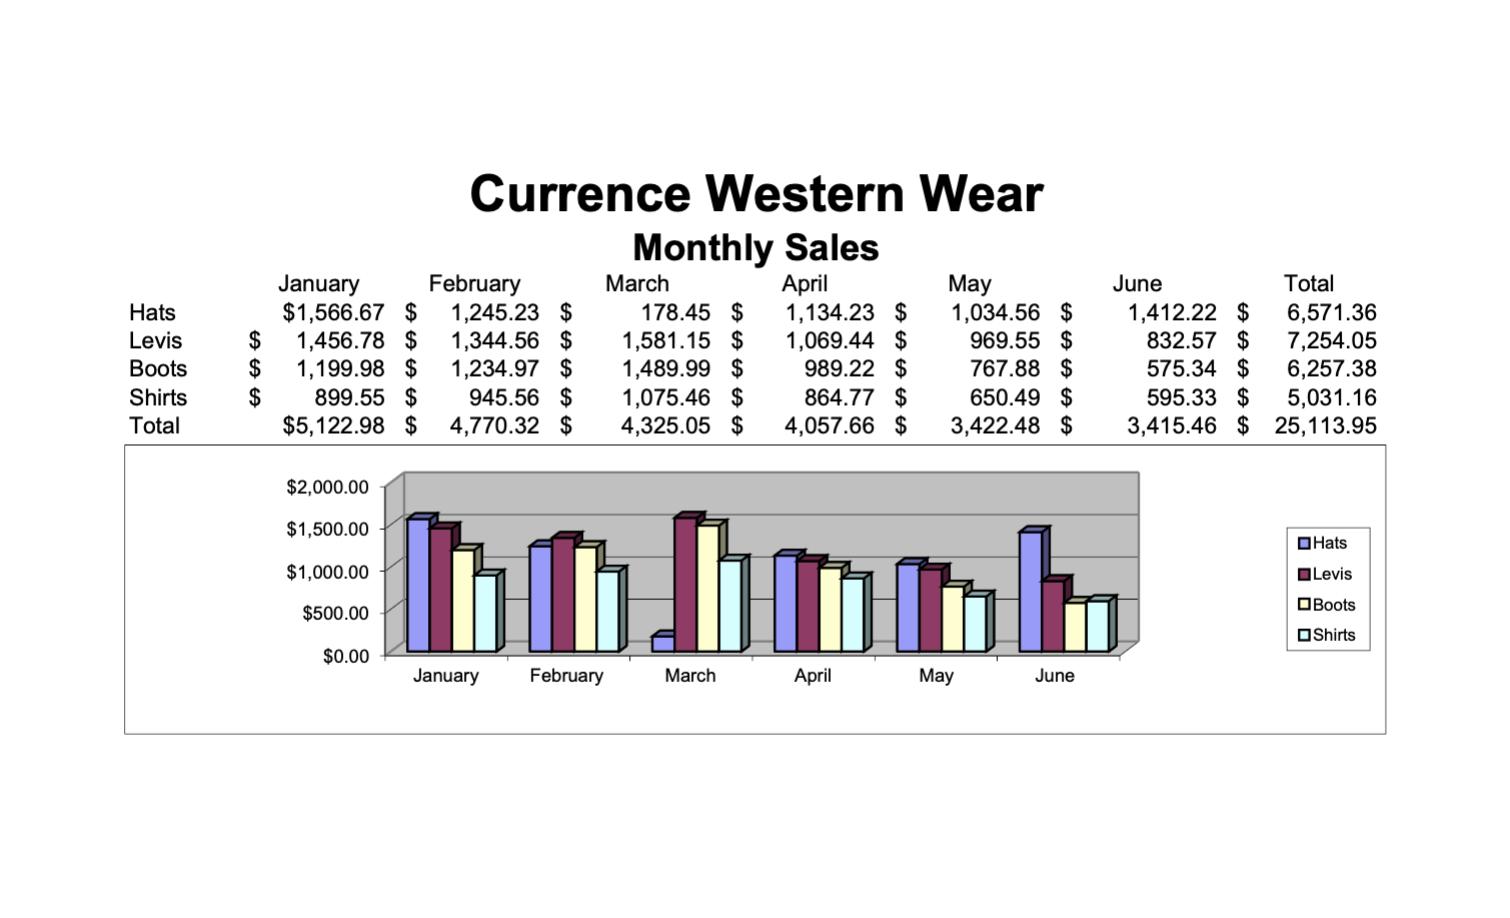 Currence Western Wear Monthly Sales Hats Levis Boots Shirts Total $$ $January February $1,566.67 $ 1,245.23 $ 1,456.78 $ 1,